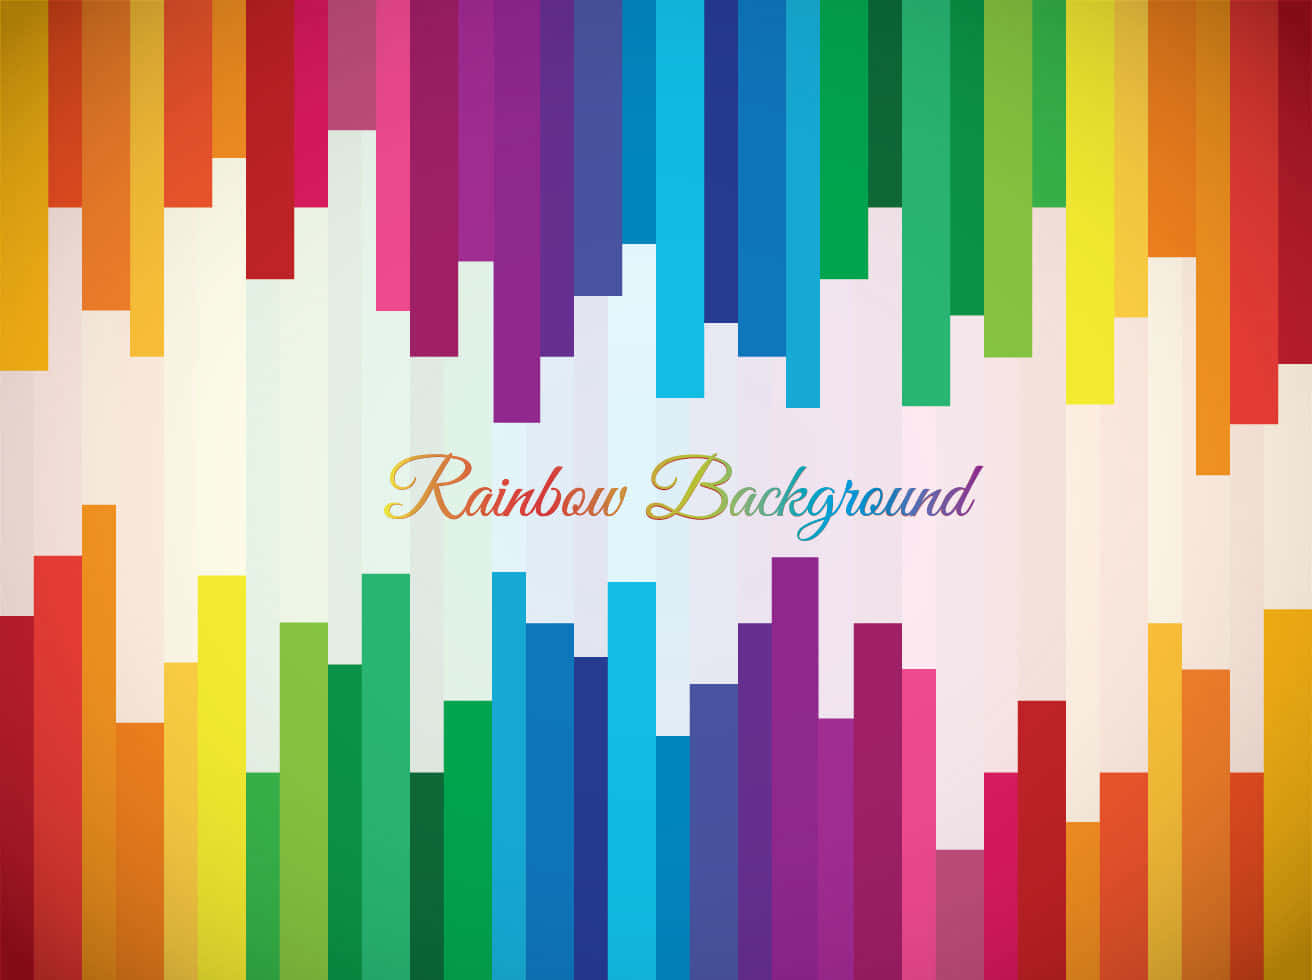 A Colorful Rainbow Gradient Pattern